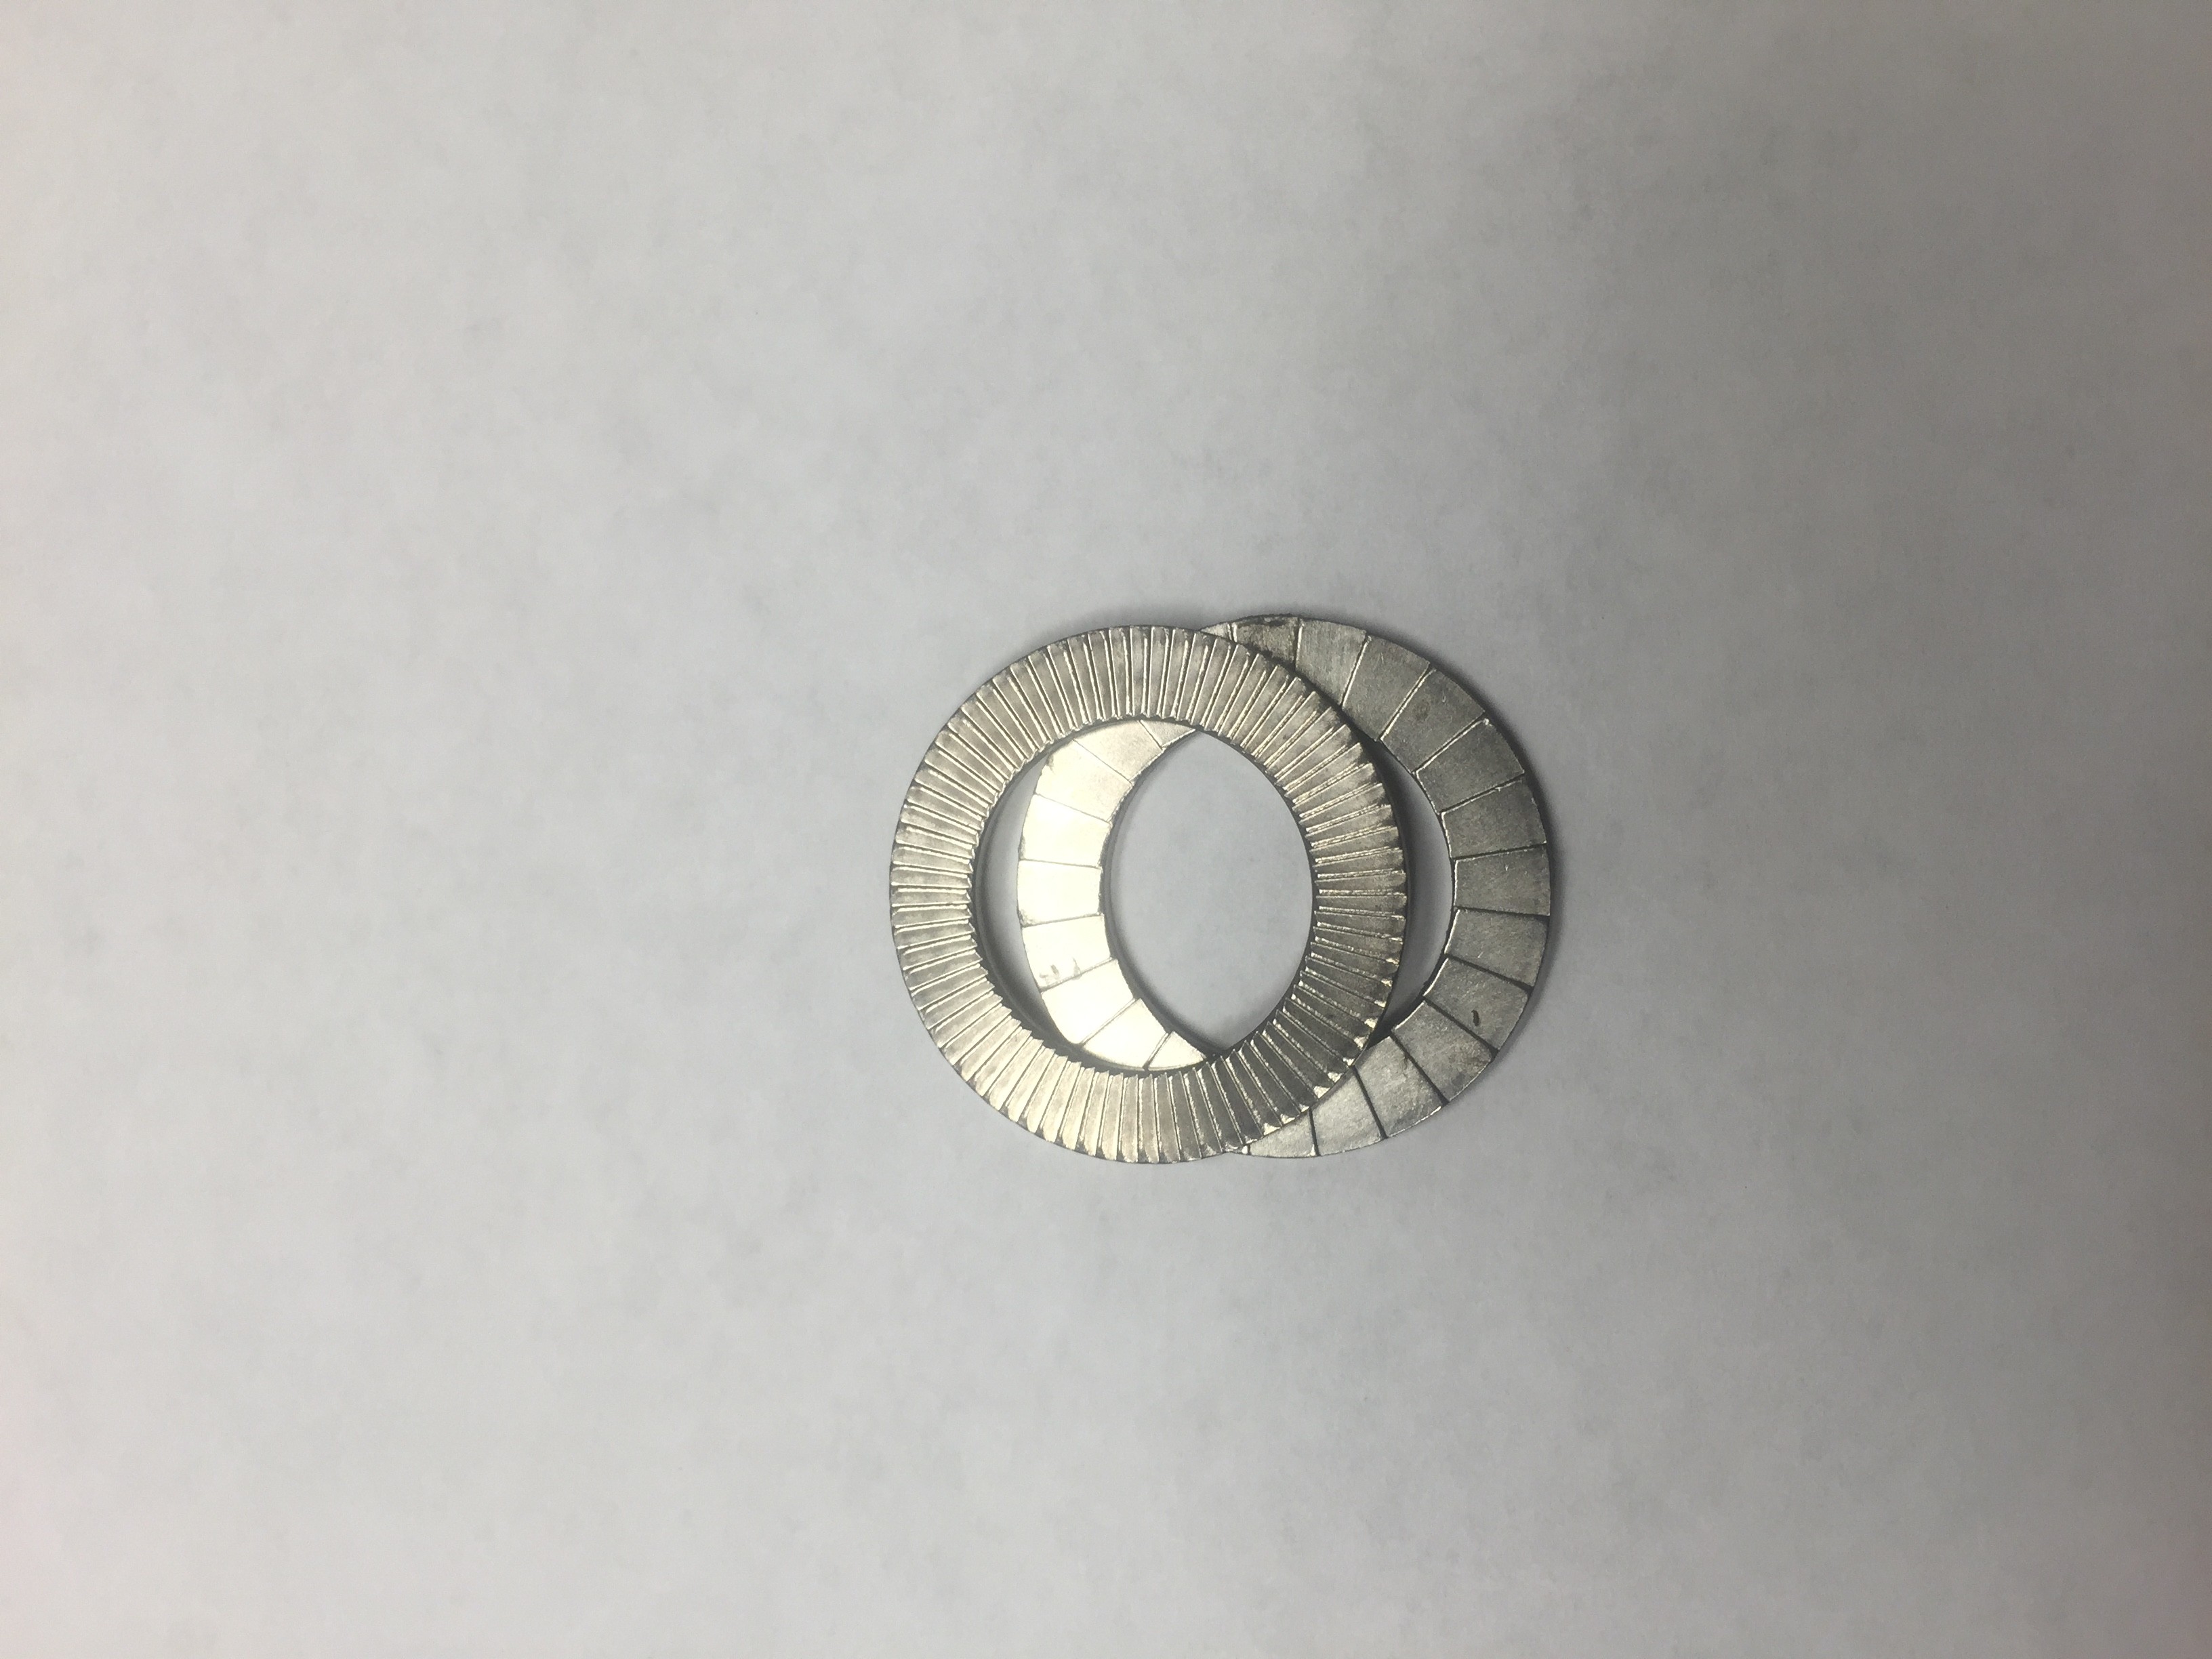 7/16 316 STAINLESS STEEL NORD-LOCK WASHER LARGE PATTERN